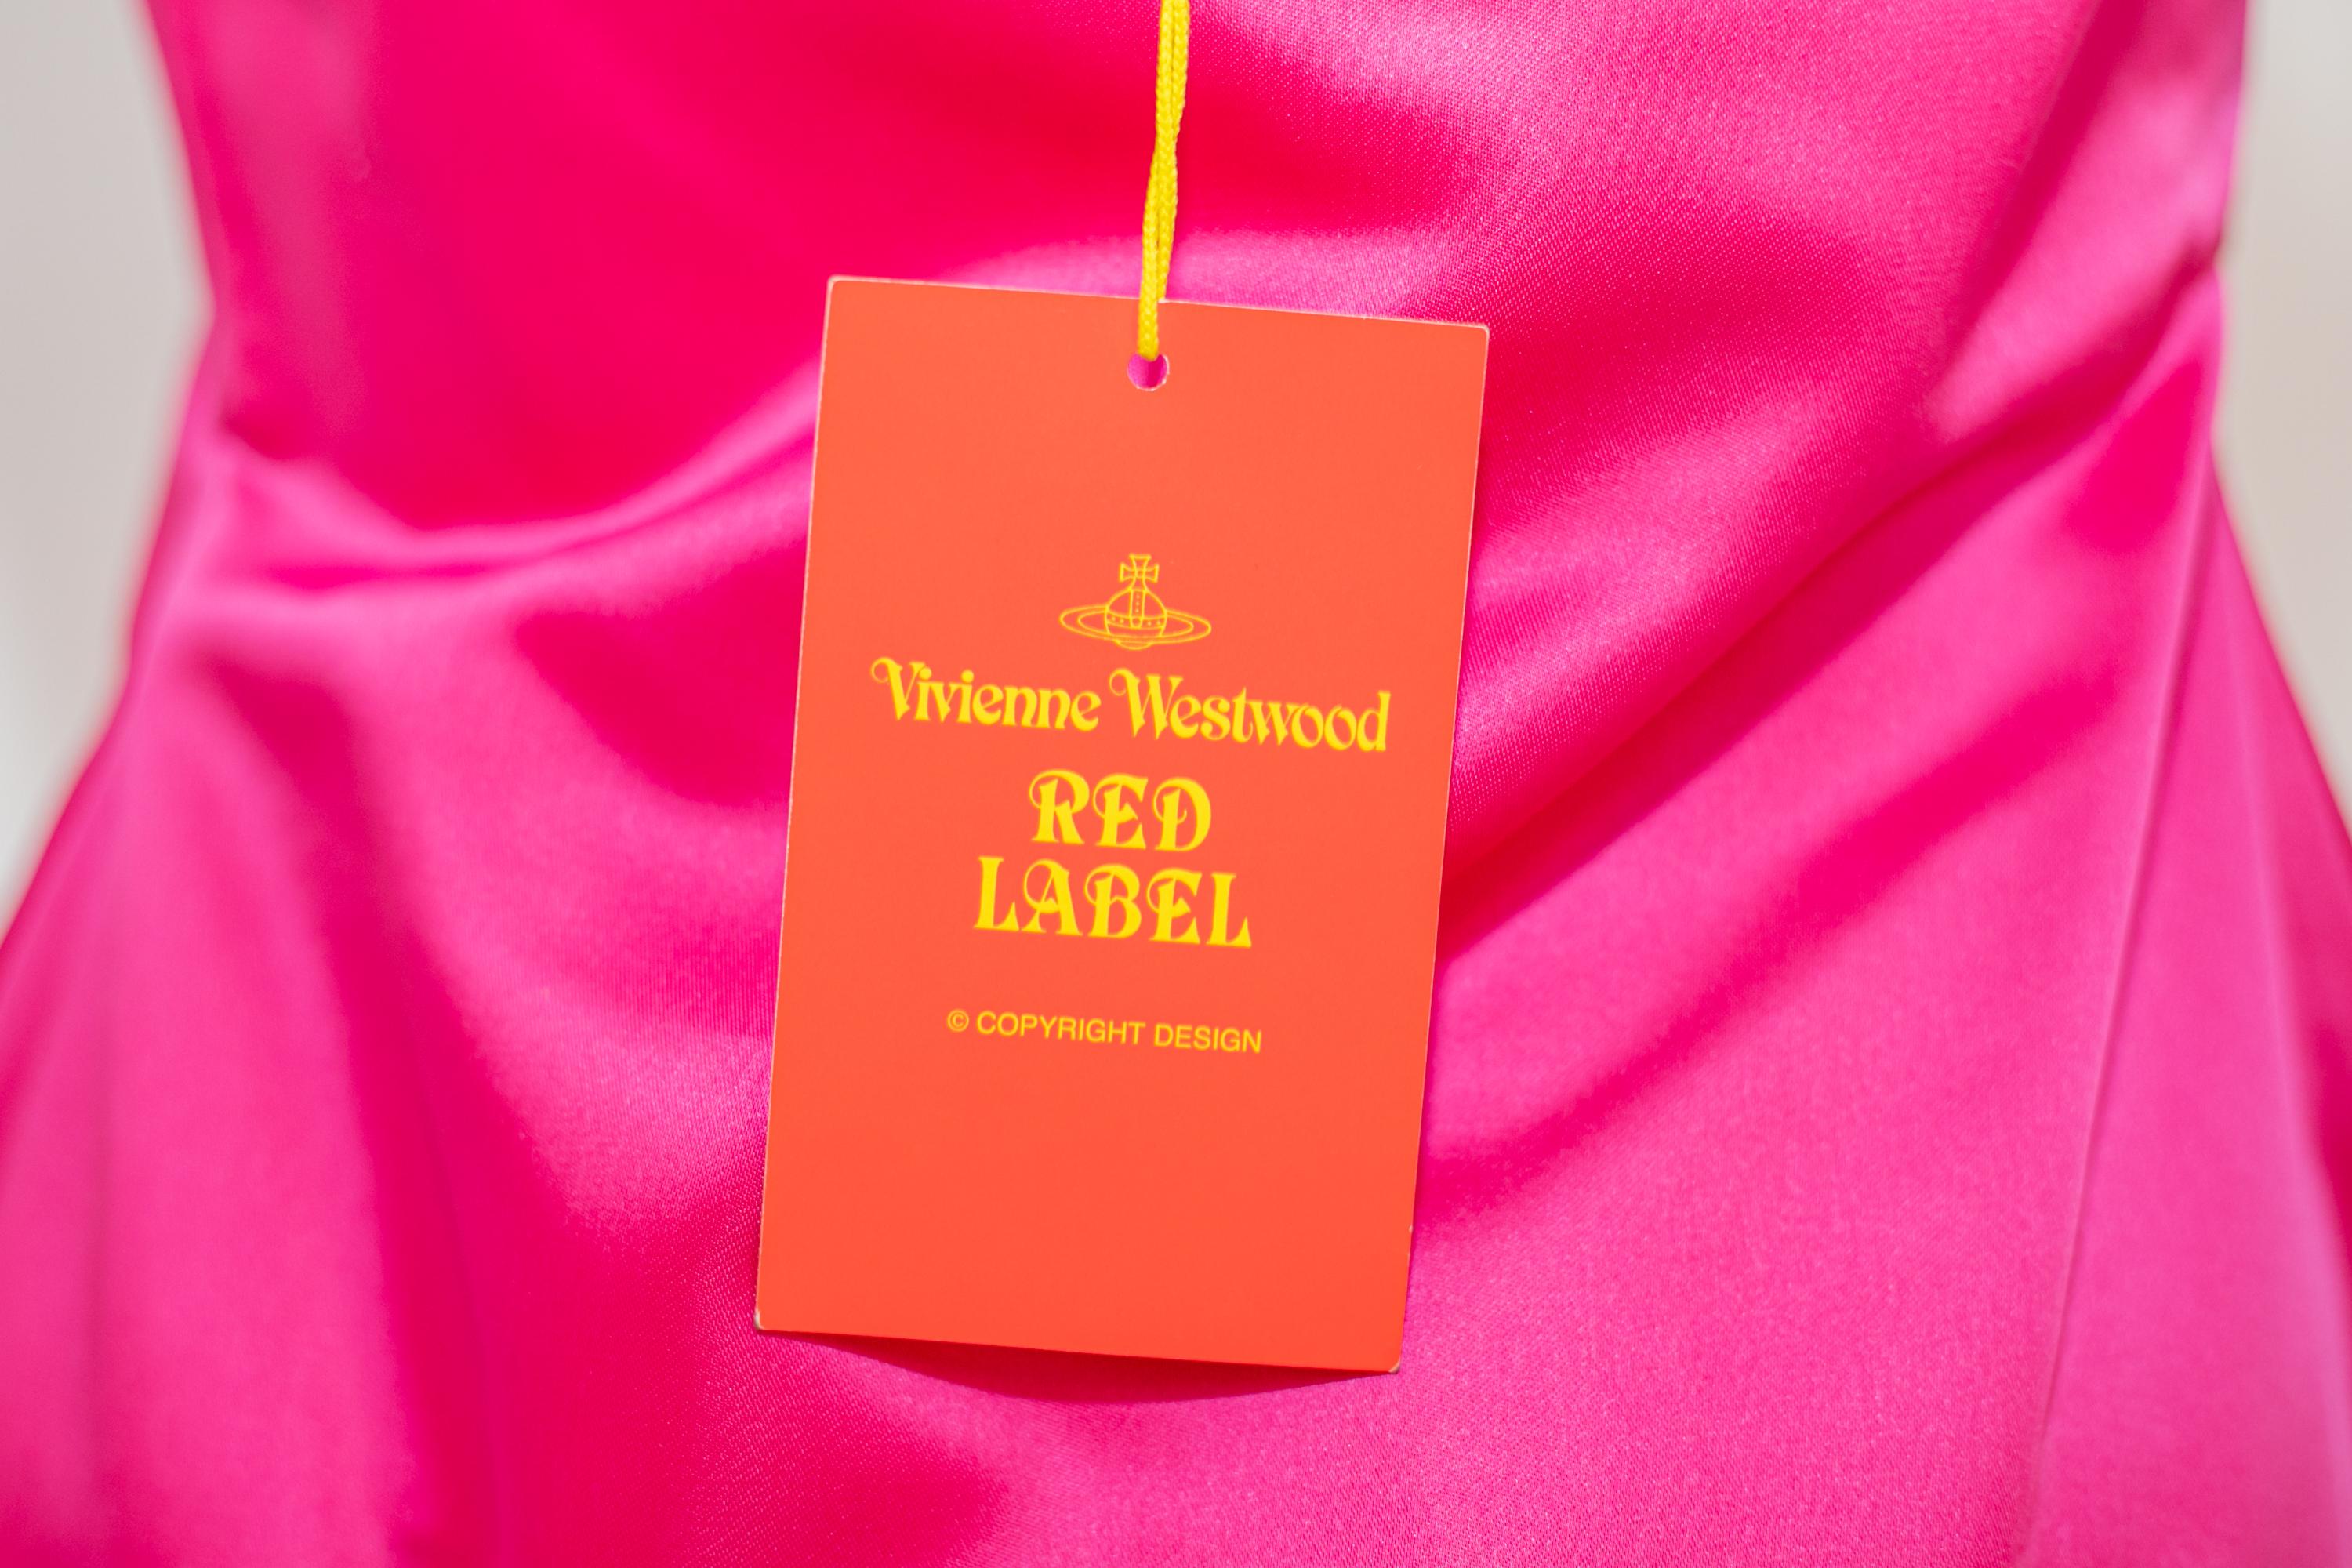 Important coloured cocktail dress designed by Vivienne Westwood in the 2000s, from the RED LABEL series.
The dress has the original label, of excellent Italian manufacture
The dress is made of a sparkling fuchsia fabric and is designed to be worn at